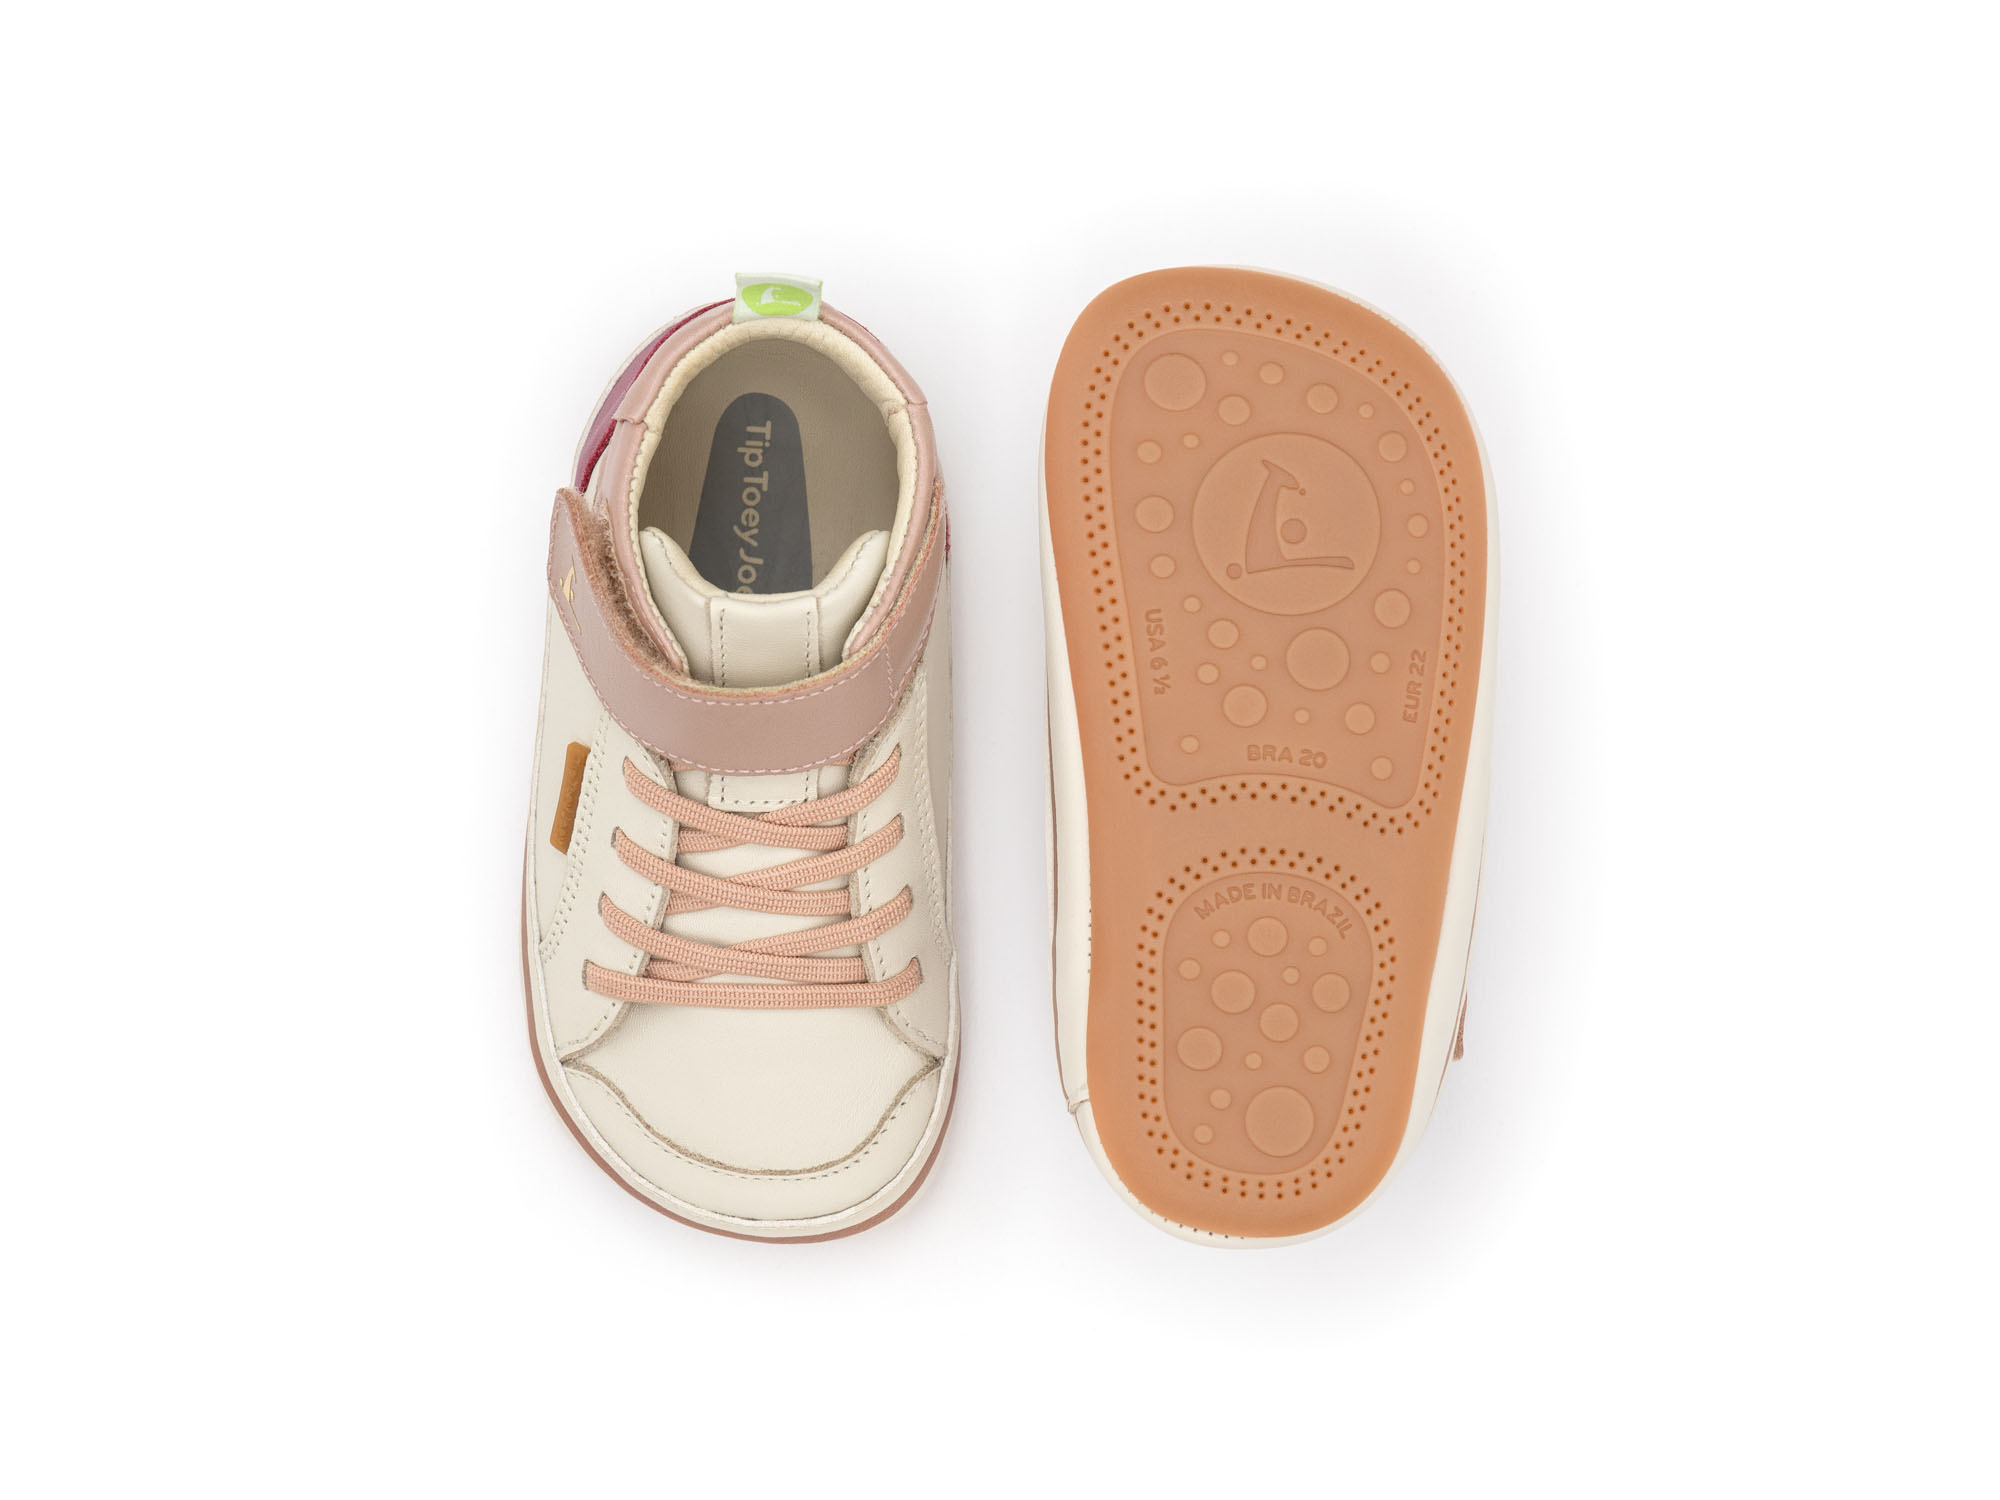 UP & GO Sneakers for Girls Alley | Tip Toey Joey - Australia - 2